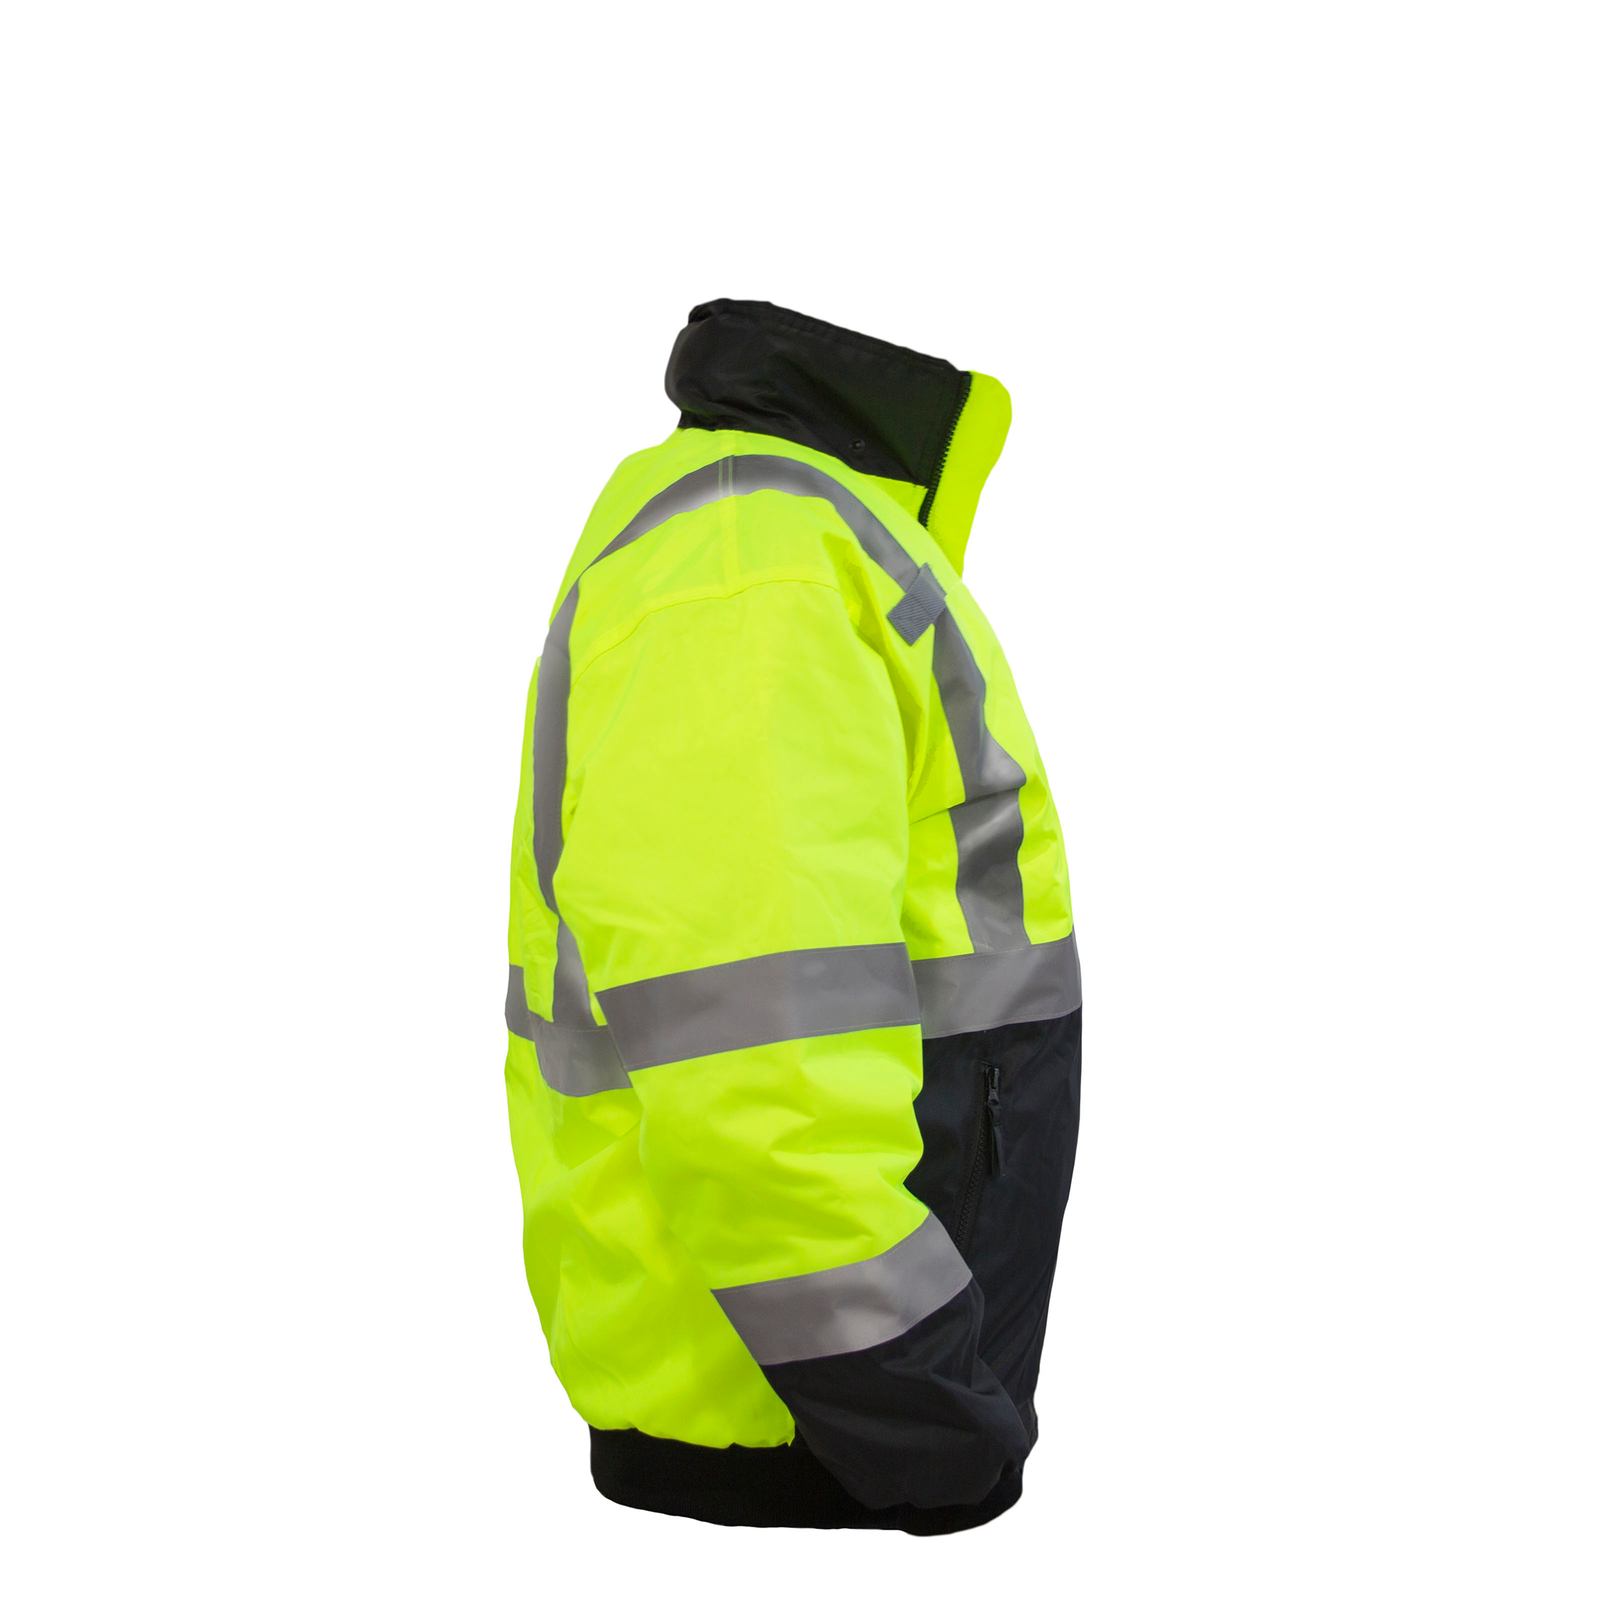 Side  view of the lime and black Hi-vis JORESTECH safety bomber jacket with reflective stripes over white background